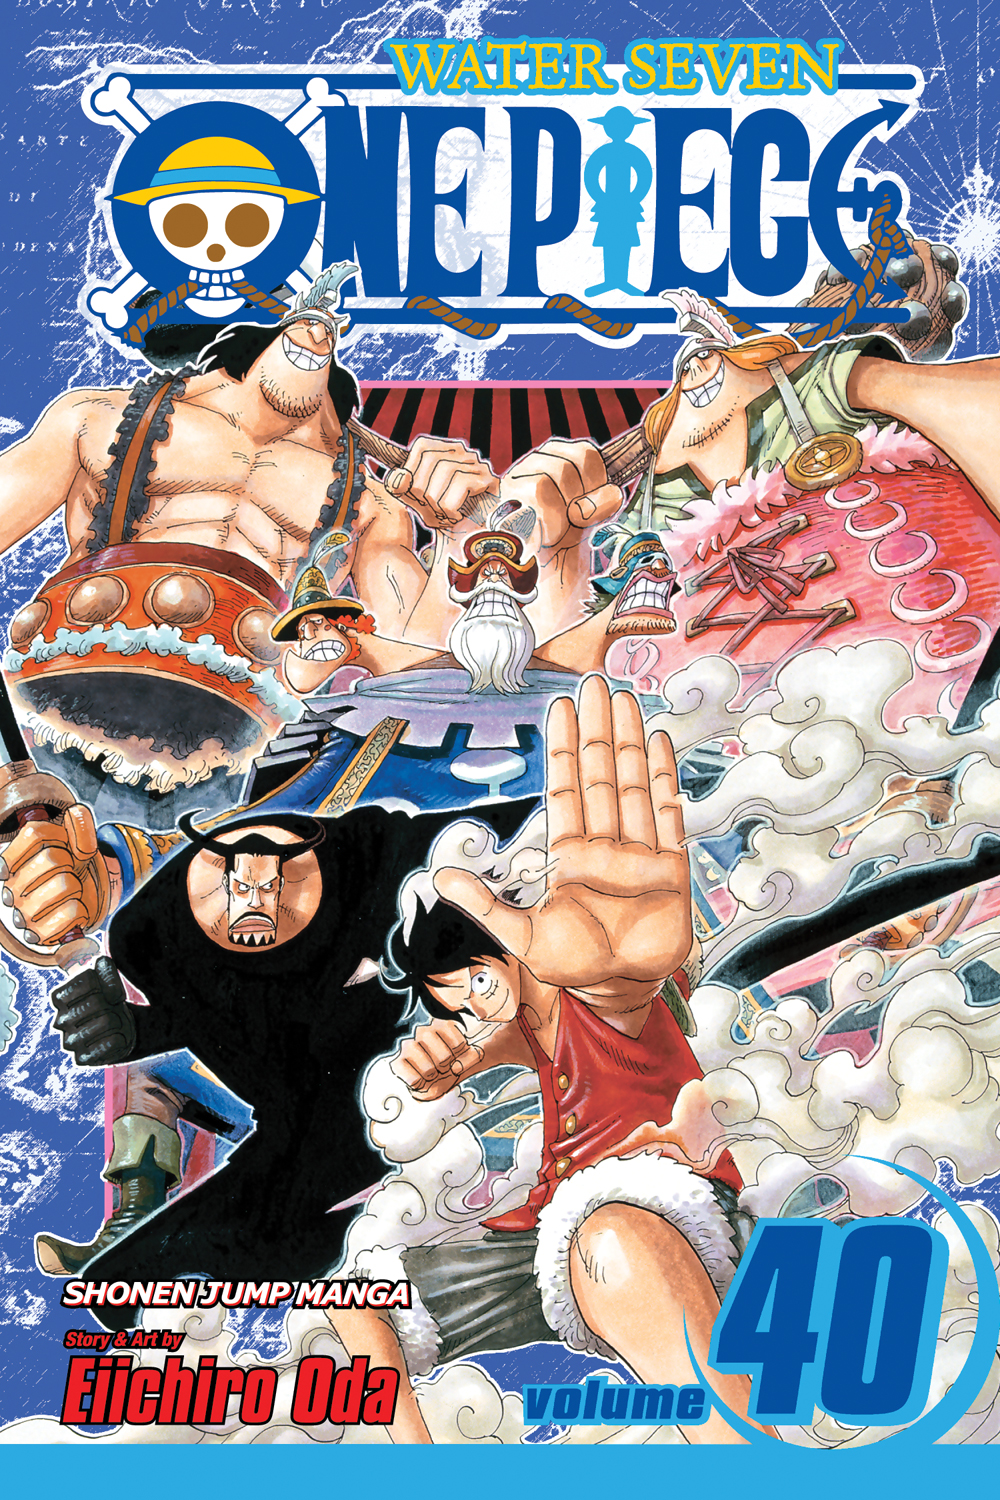 one-piece-manga-volume-40-water-seven image count 0